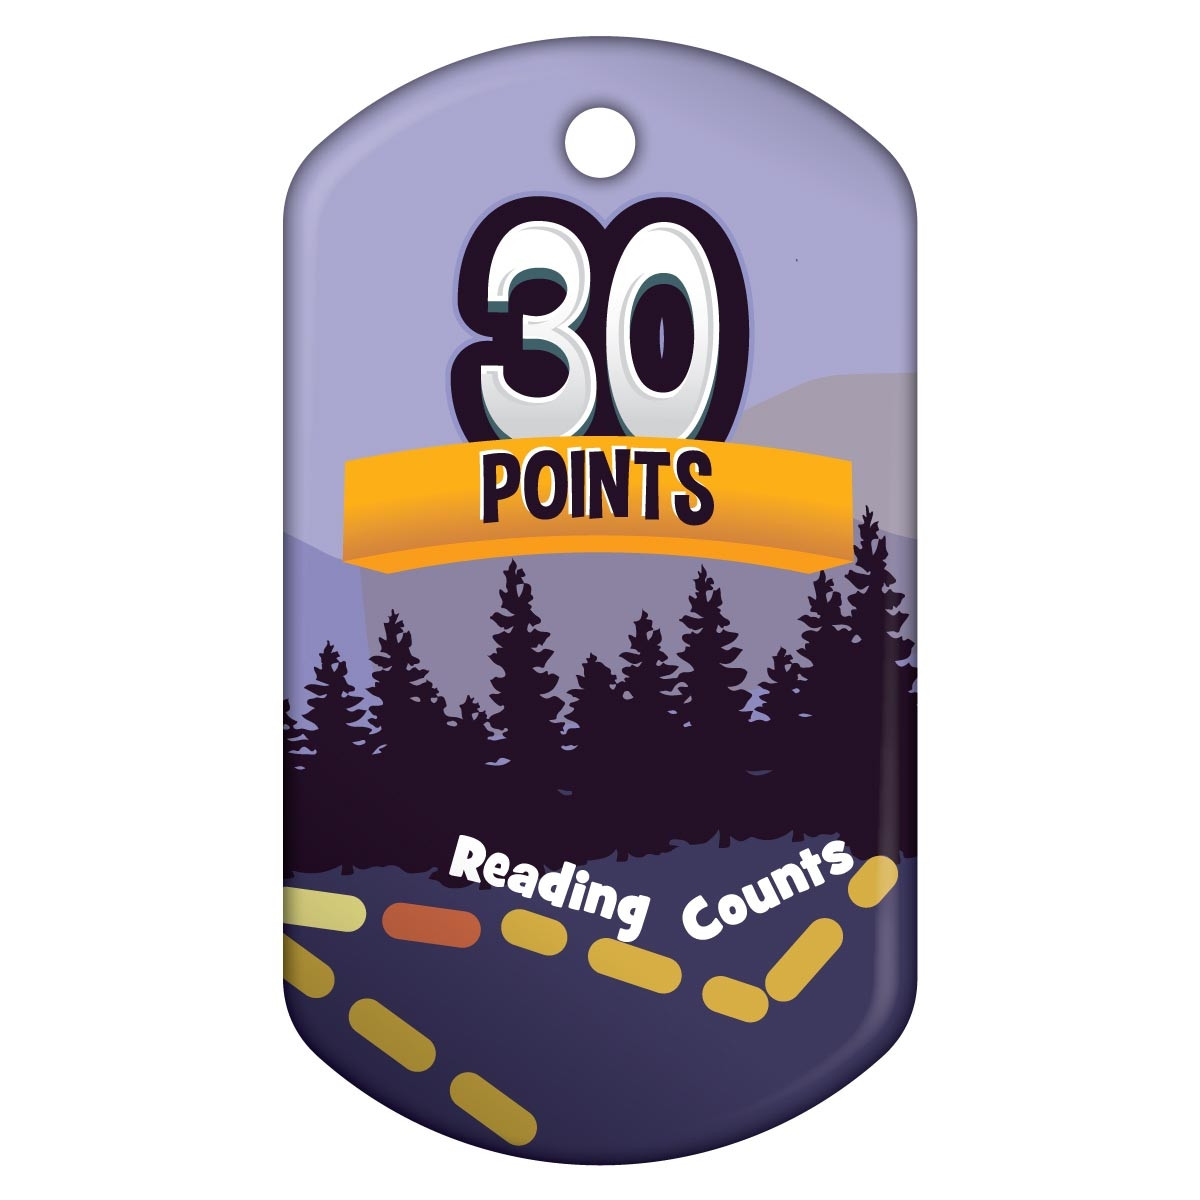 Dog Brag Tags - Reading Counts (30 Points)